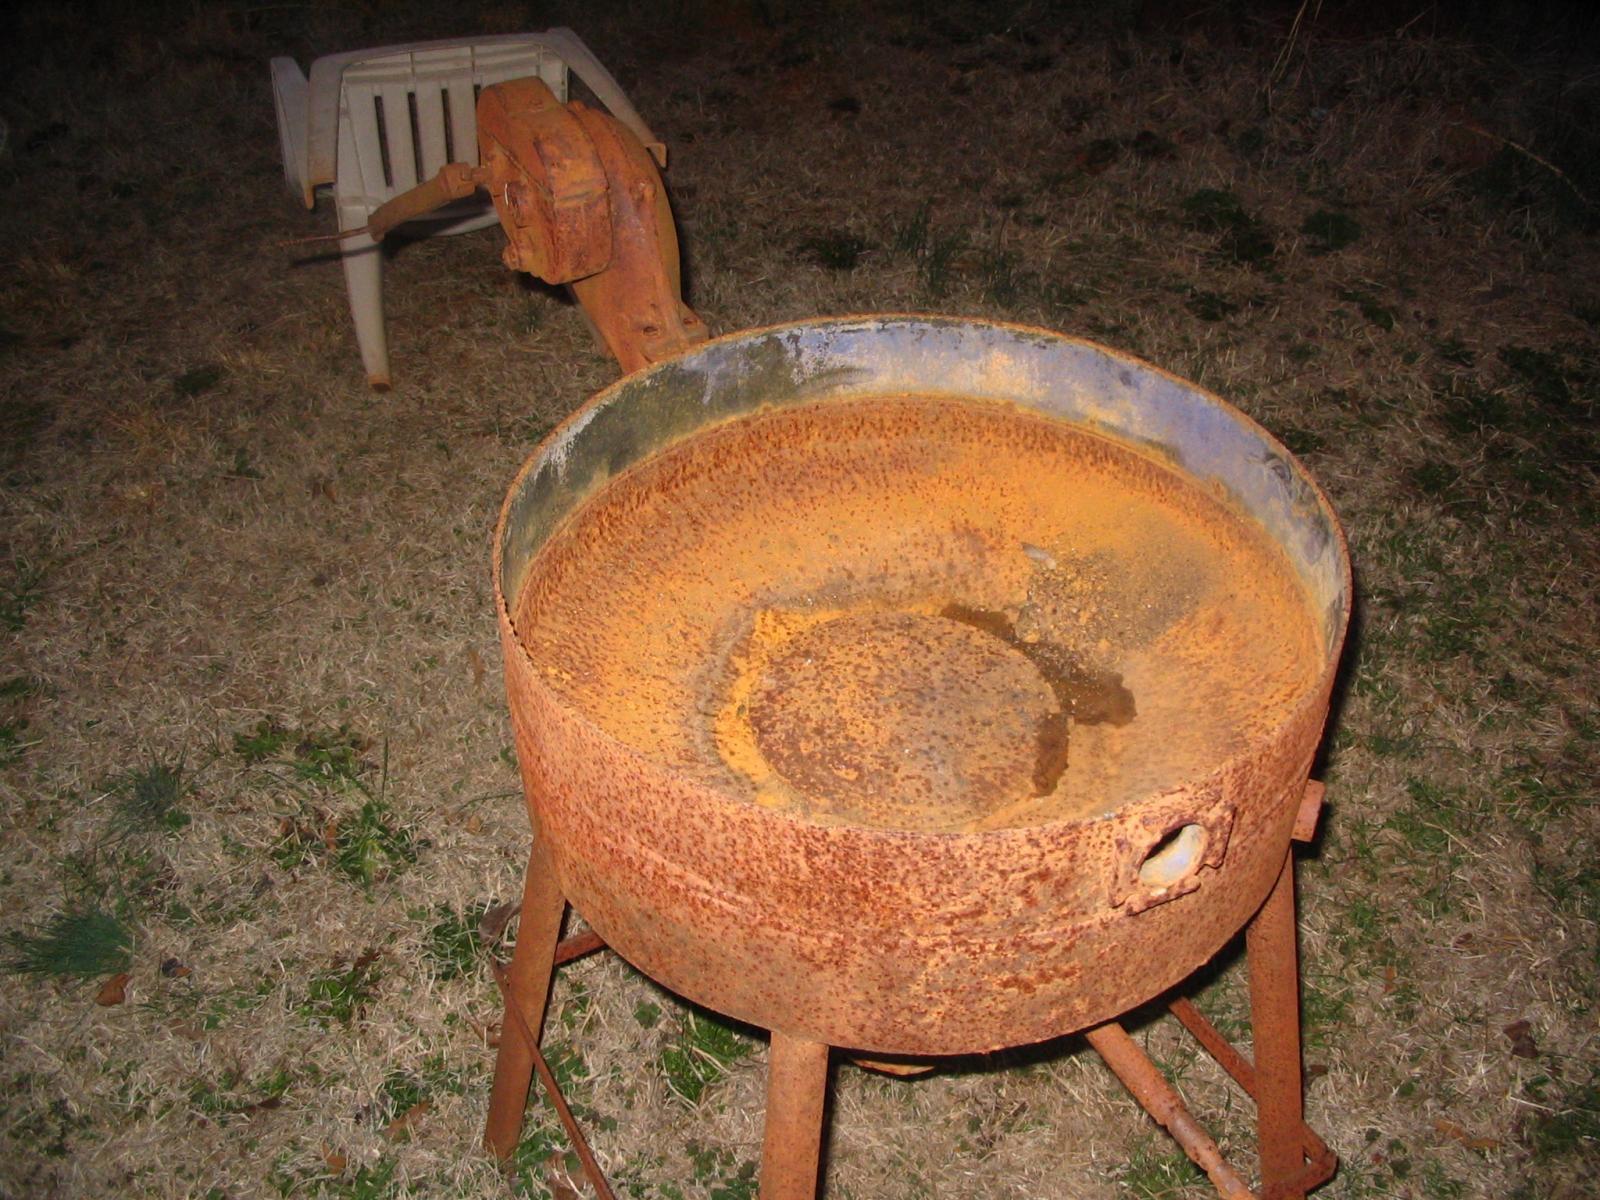 My $10 Forge